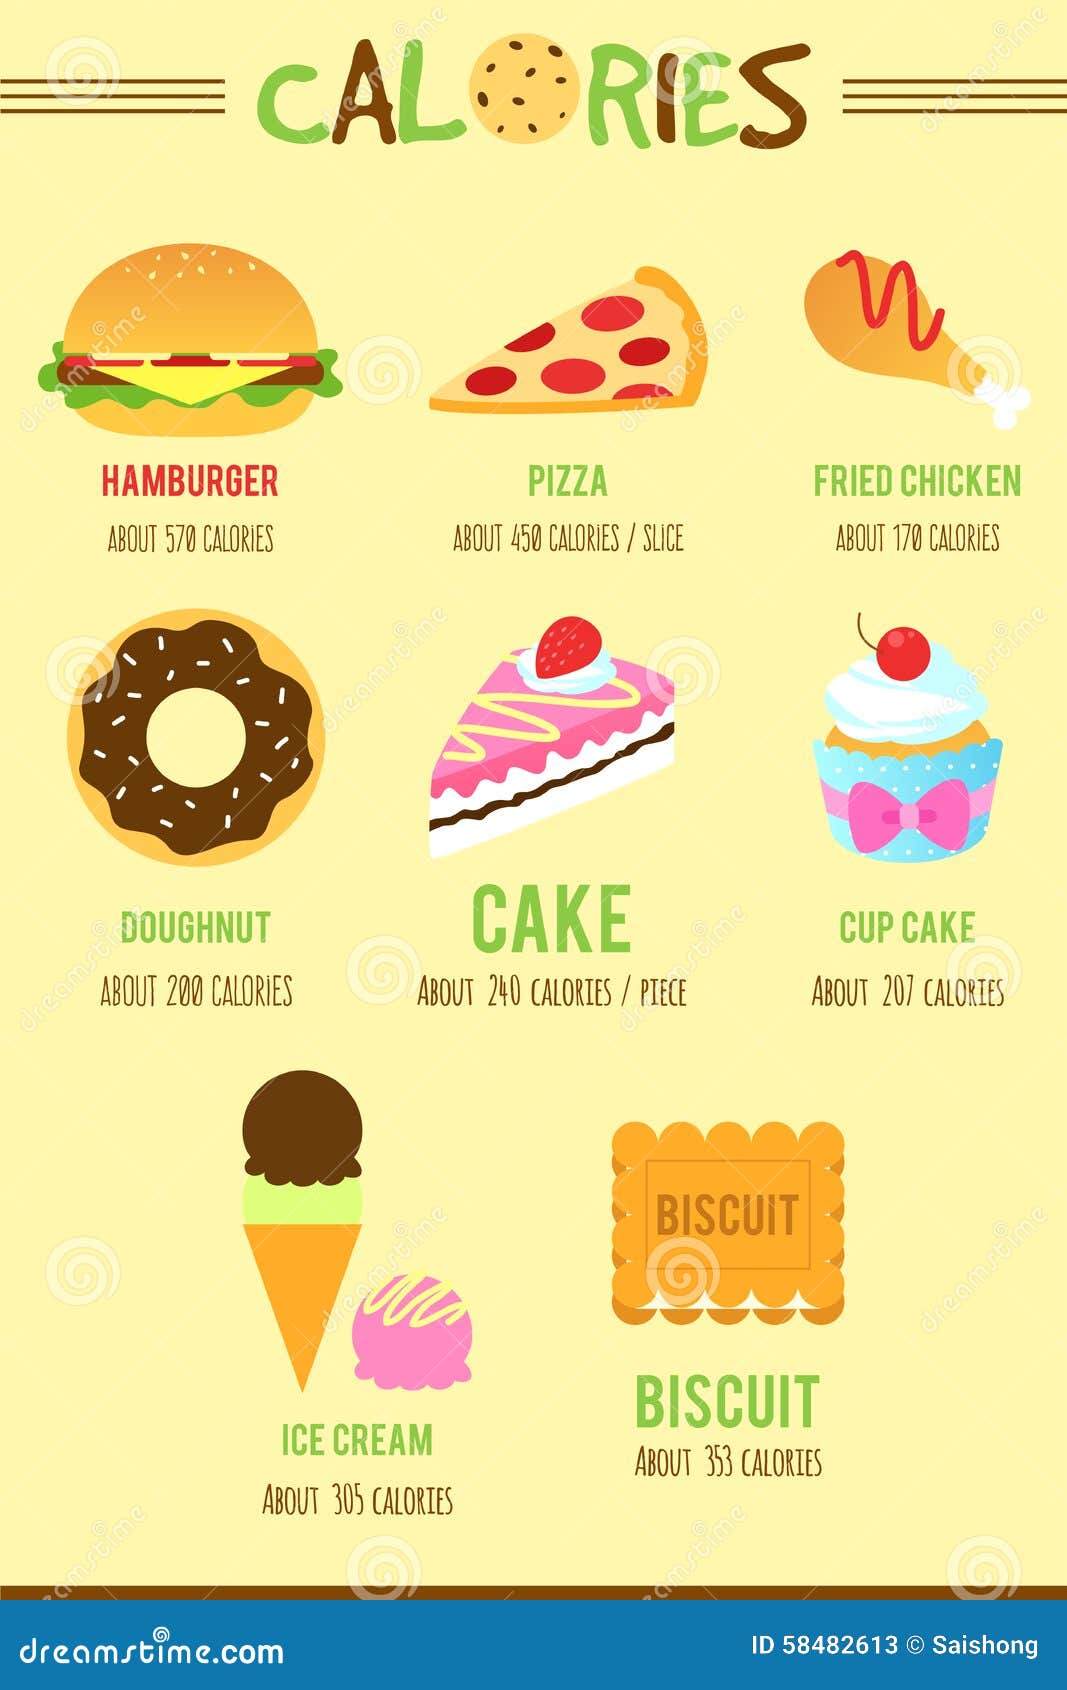 food and calories